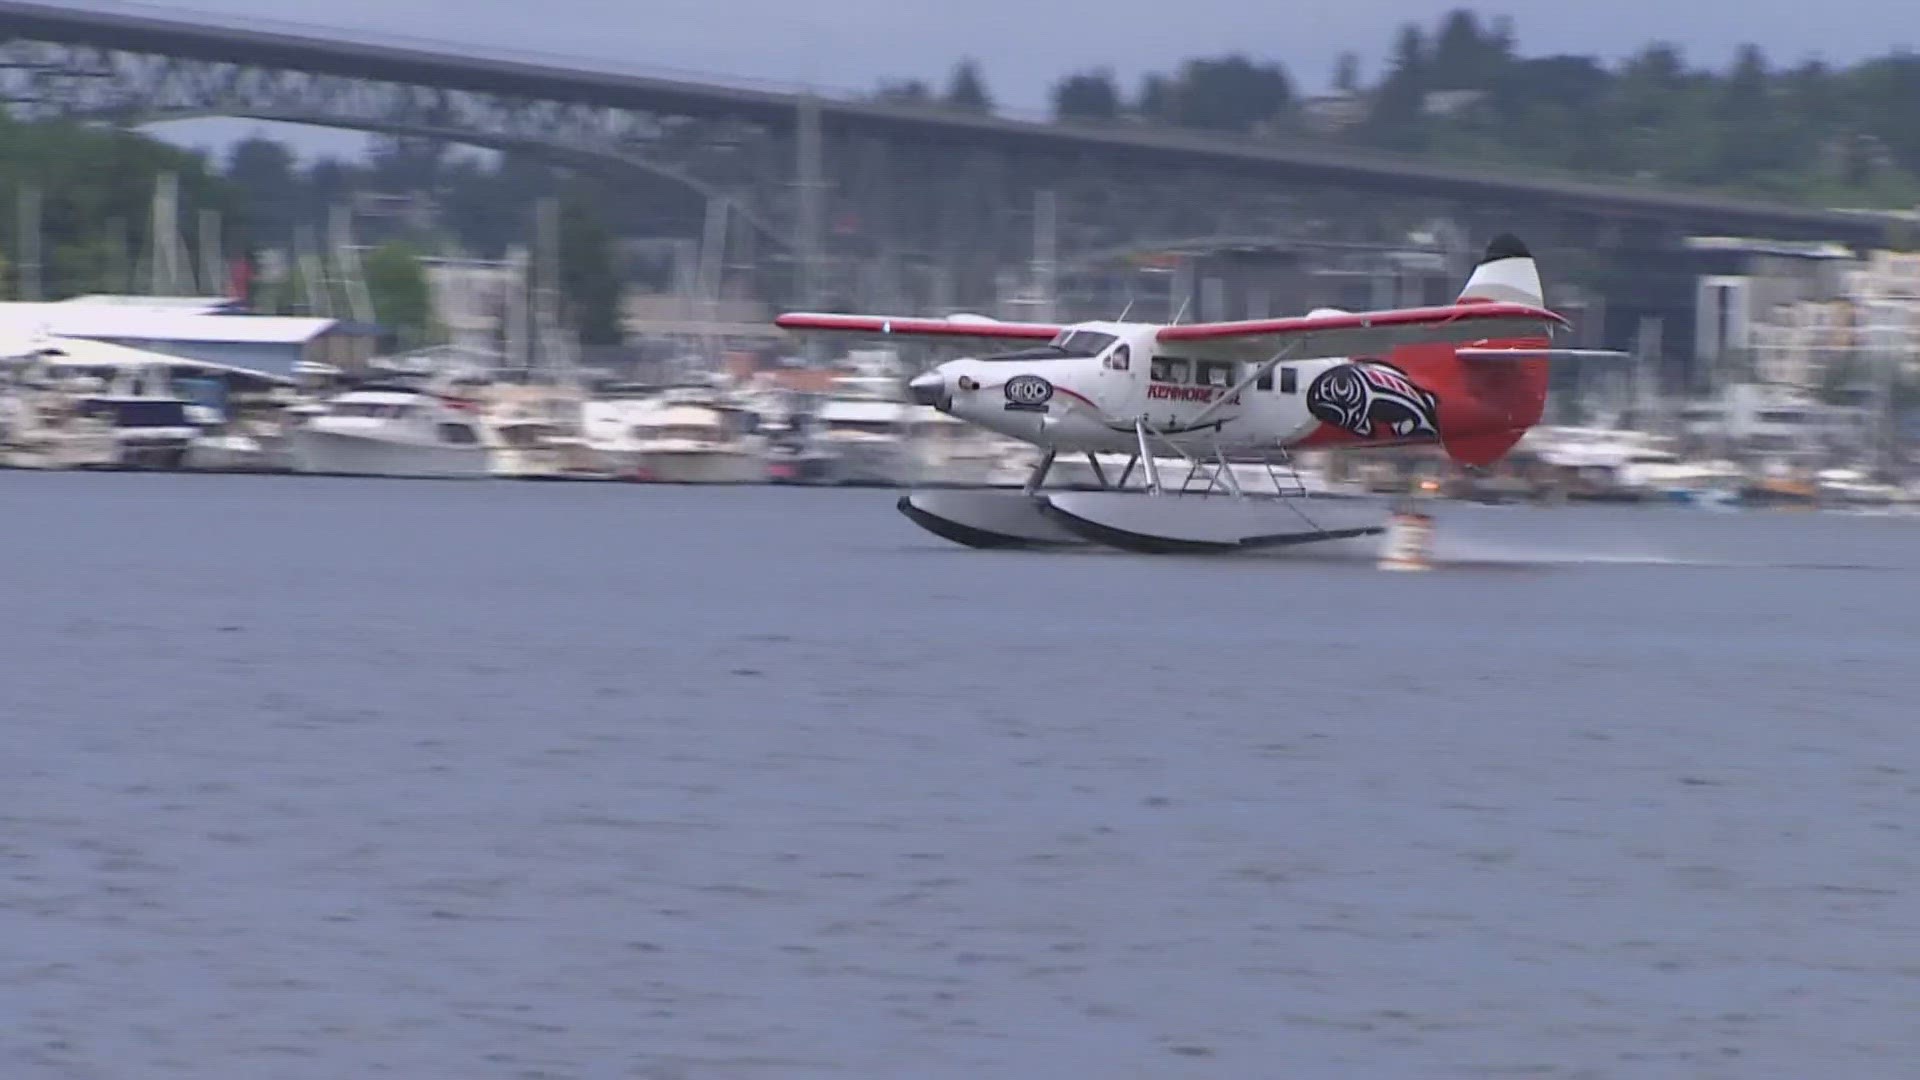 The Recreational Boating Association of Washington launched the "Mind the Zone" campaign to warn boaters to stay 200 feet away from landing seaplanes.